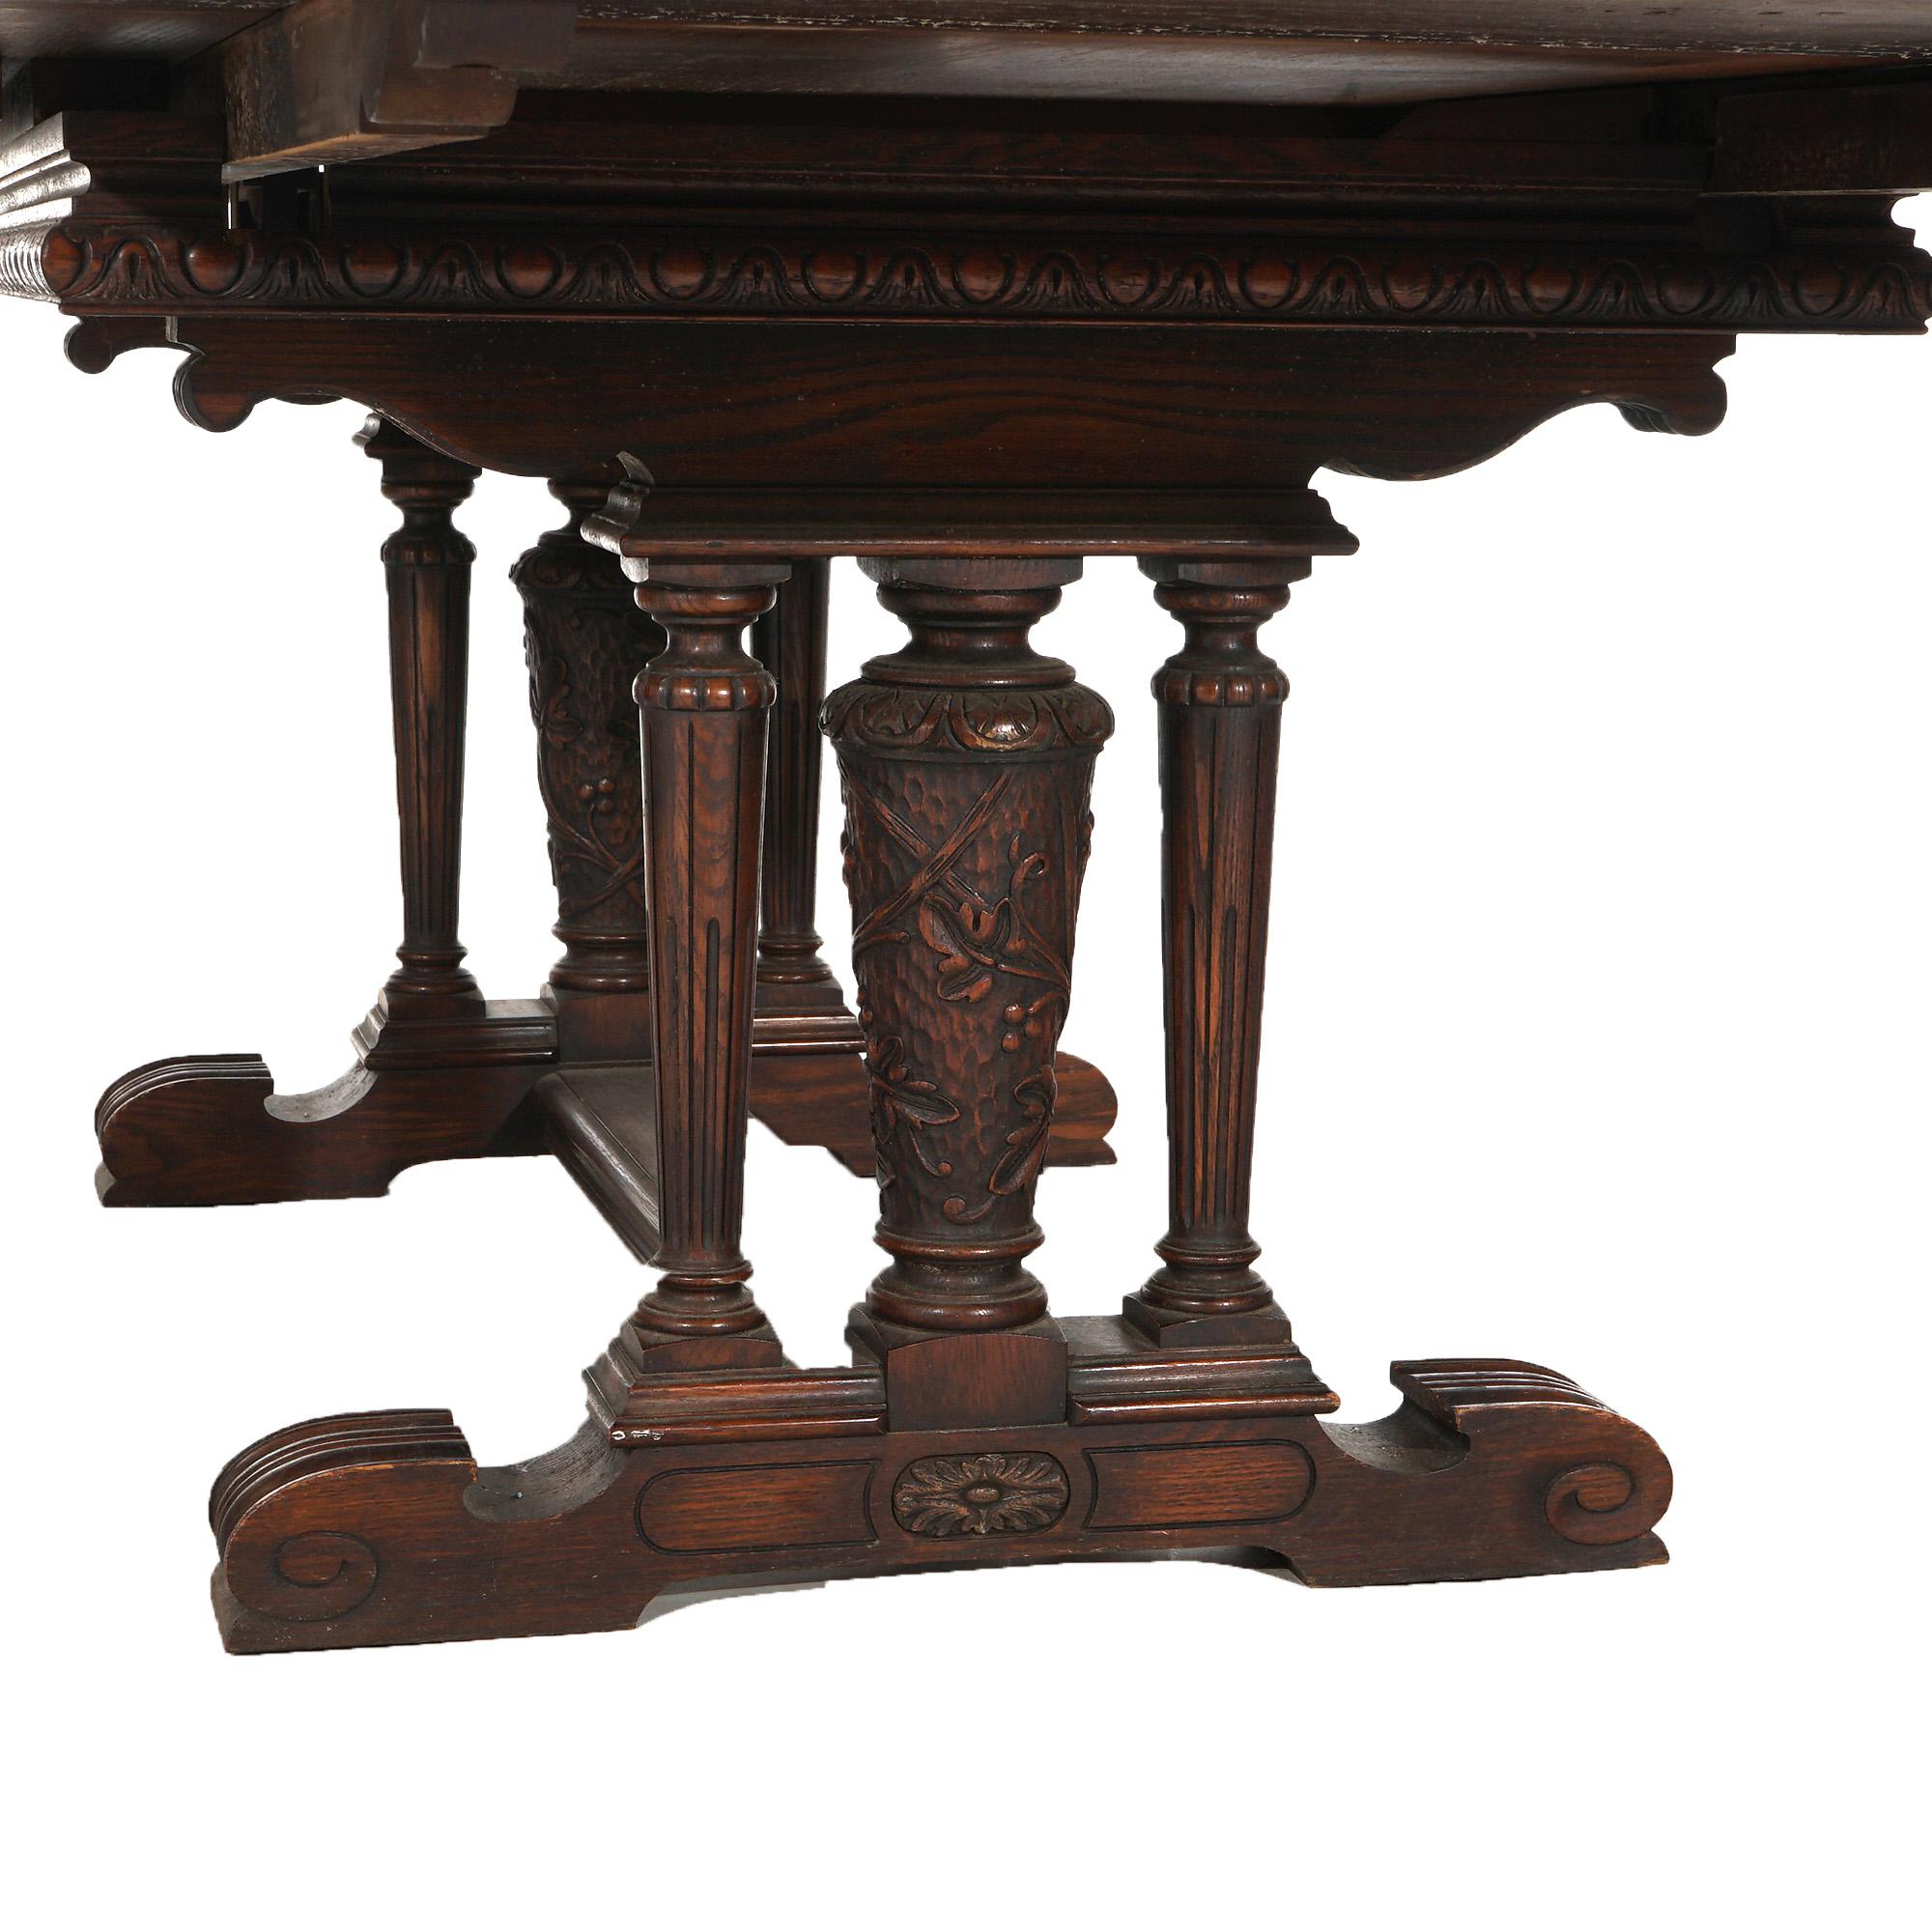 ***Ask About Reduced In-House Delivery Rates - Reliable Professional Service & Fully Insured***
Antique Elizabethan Jacobean Style Carved Oak Draw-Top Trestle Table with Foliate Carved Columns C1900

Measures - 102.25